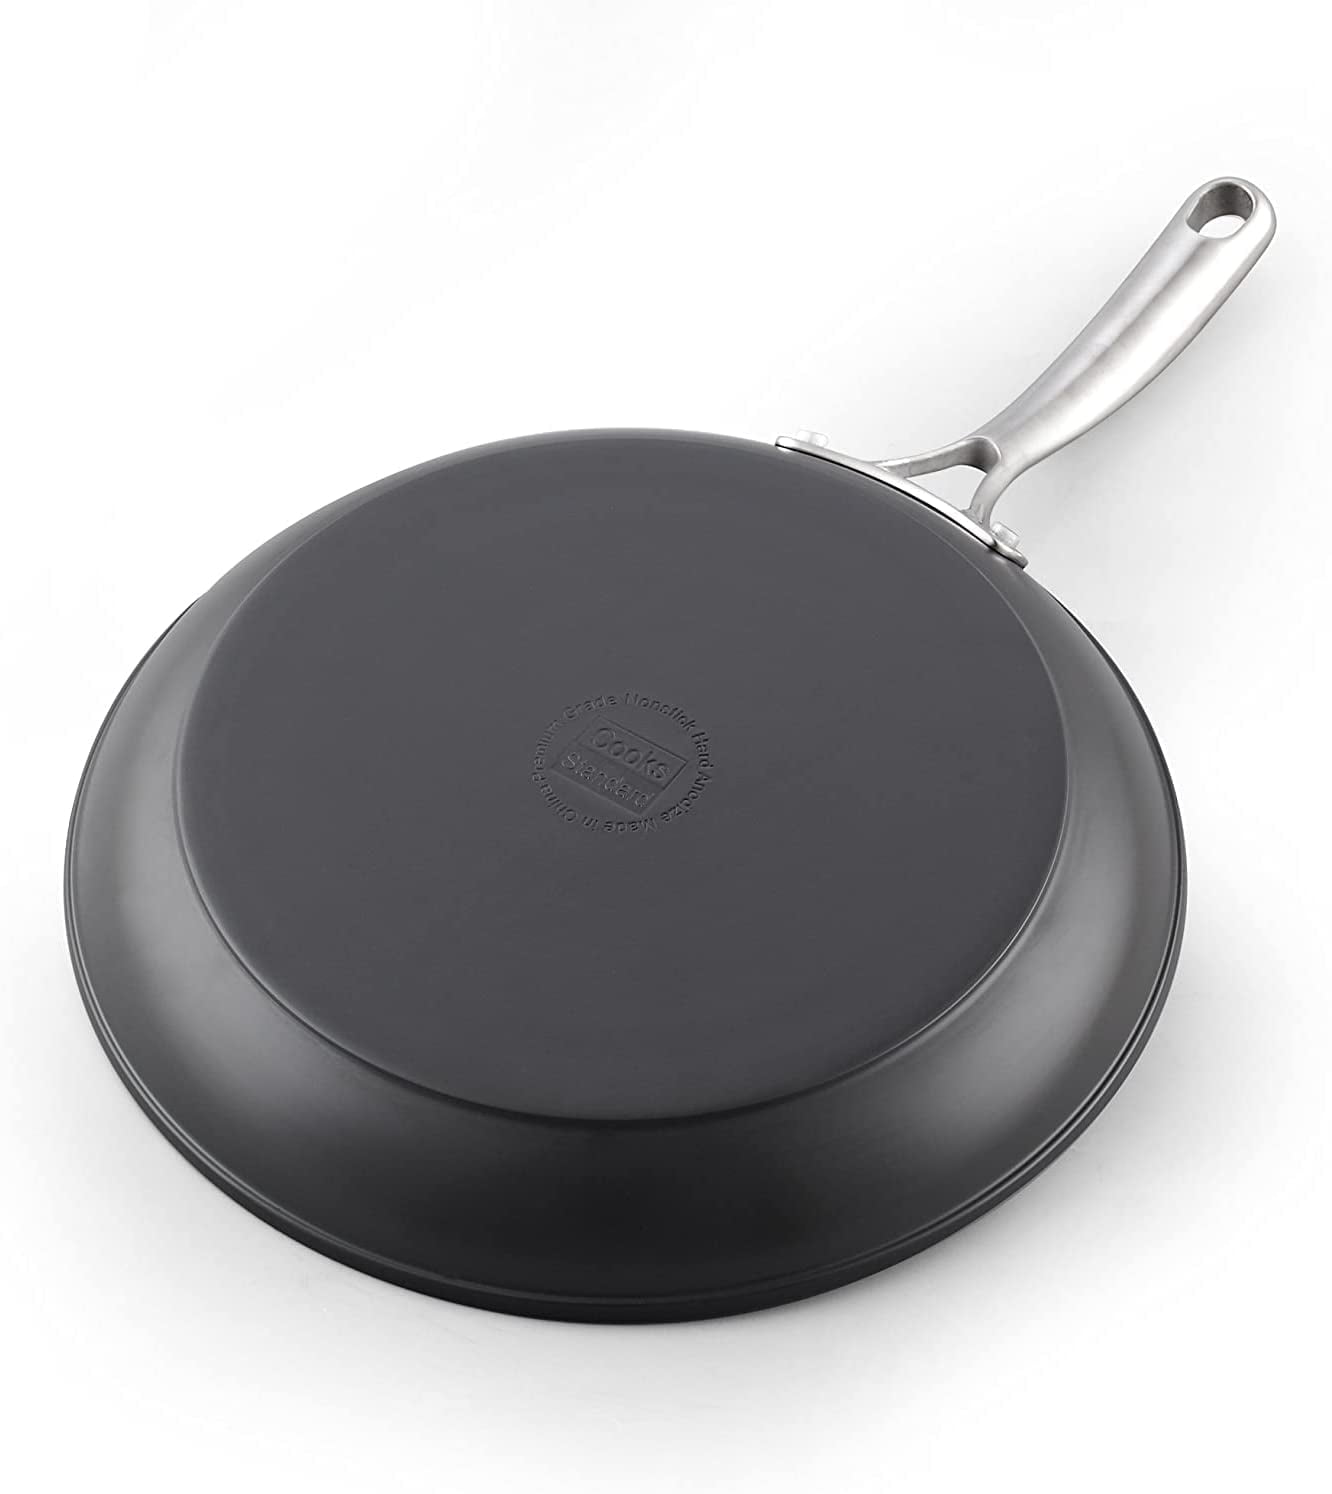 Wodillo Nonstick Frying Pan Skillet, Nonstick Omelette Pan,Induction Base,  Hard-Anodized, Durable & Oven Safe to 420°F, Dishwasher Safe (10 INCH)